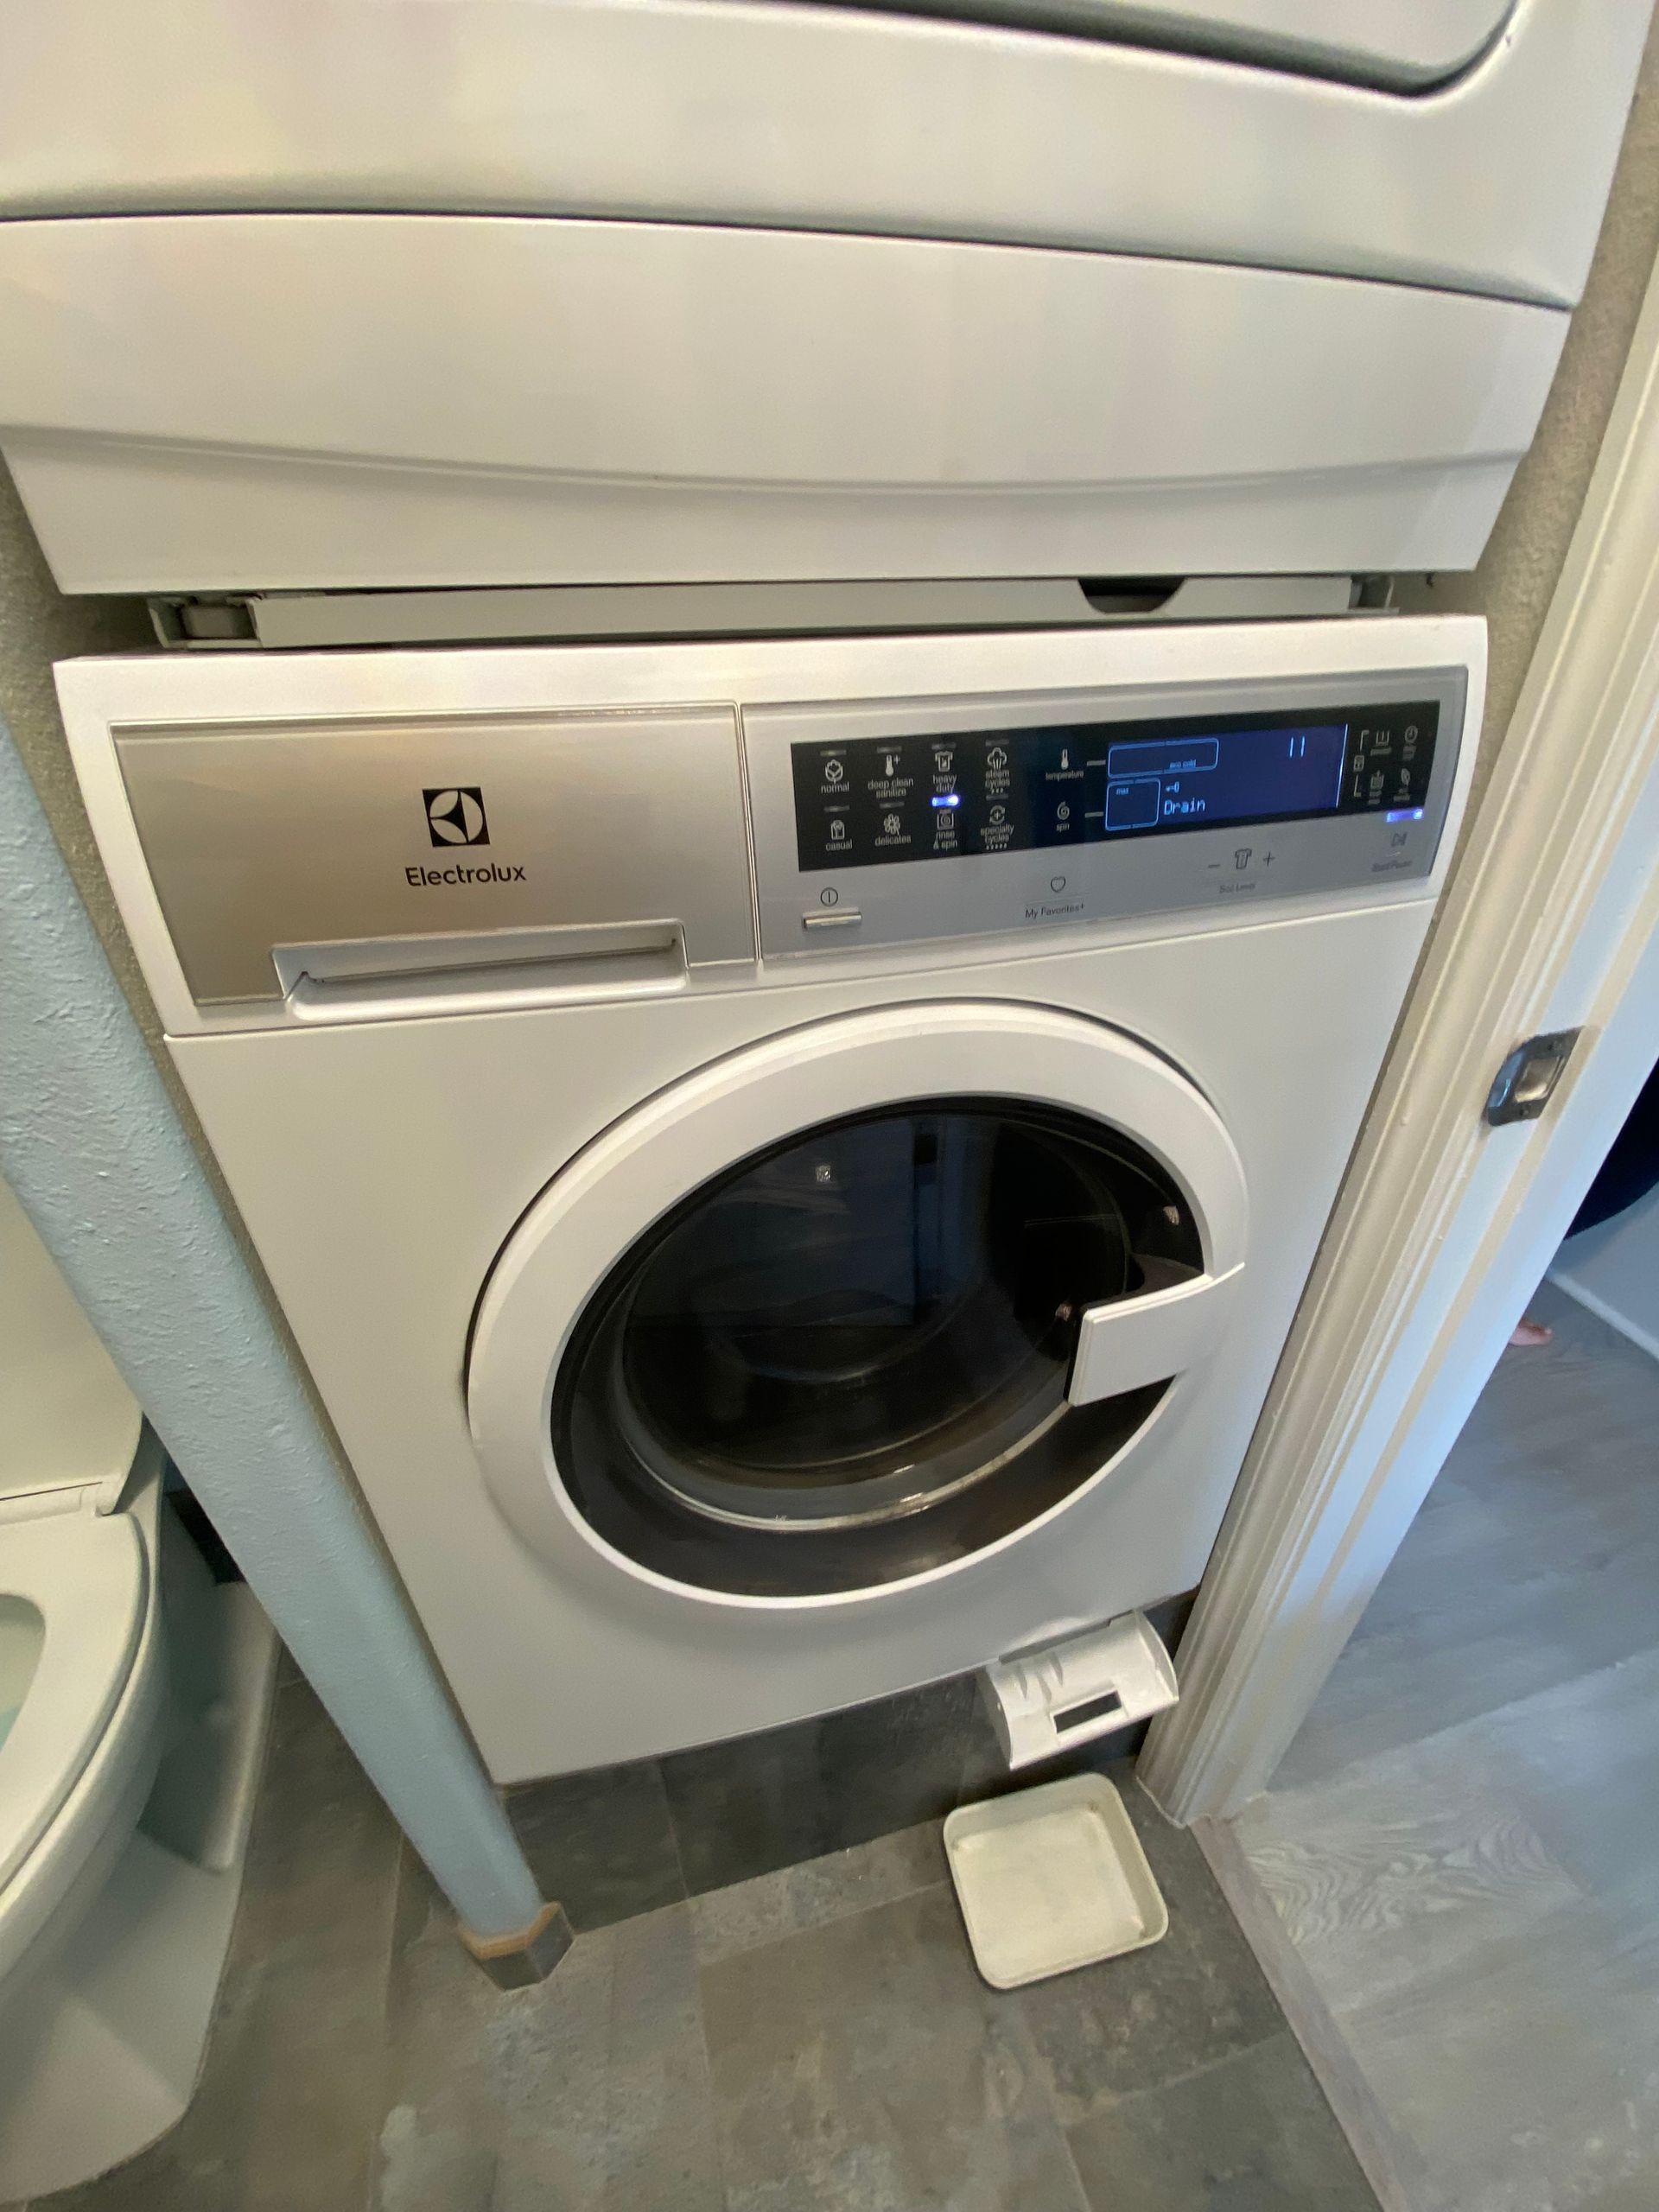 Electrolux washer repair by Level Appliance Repair